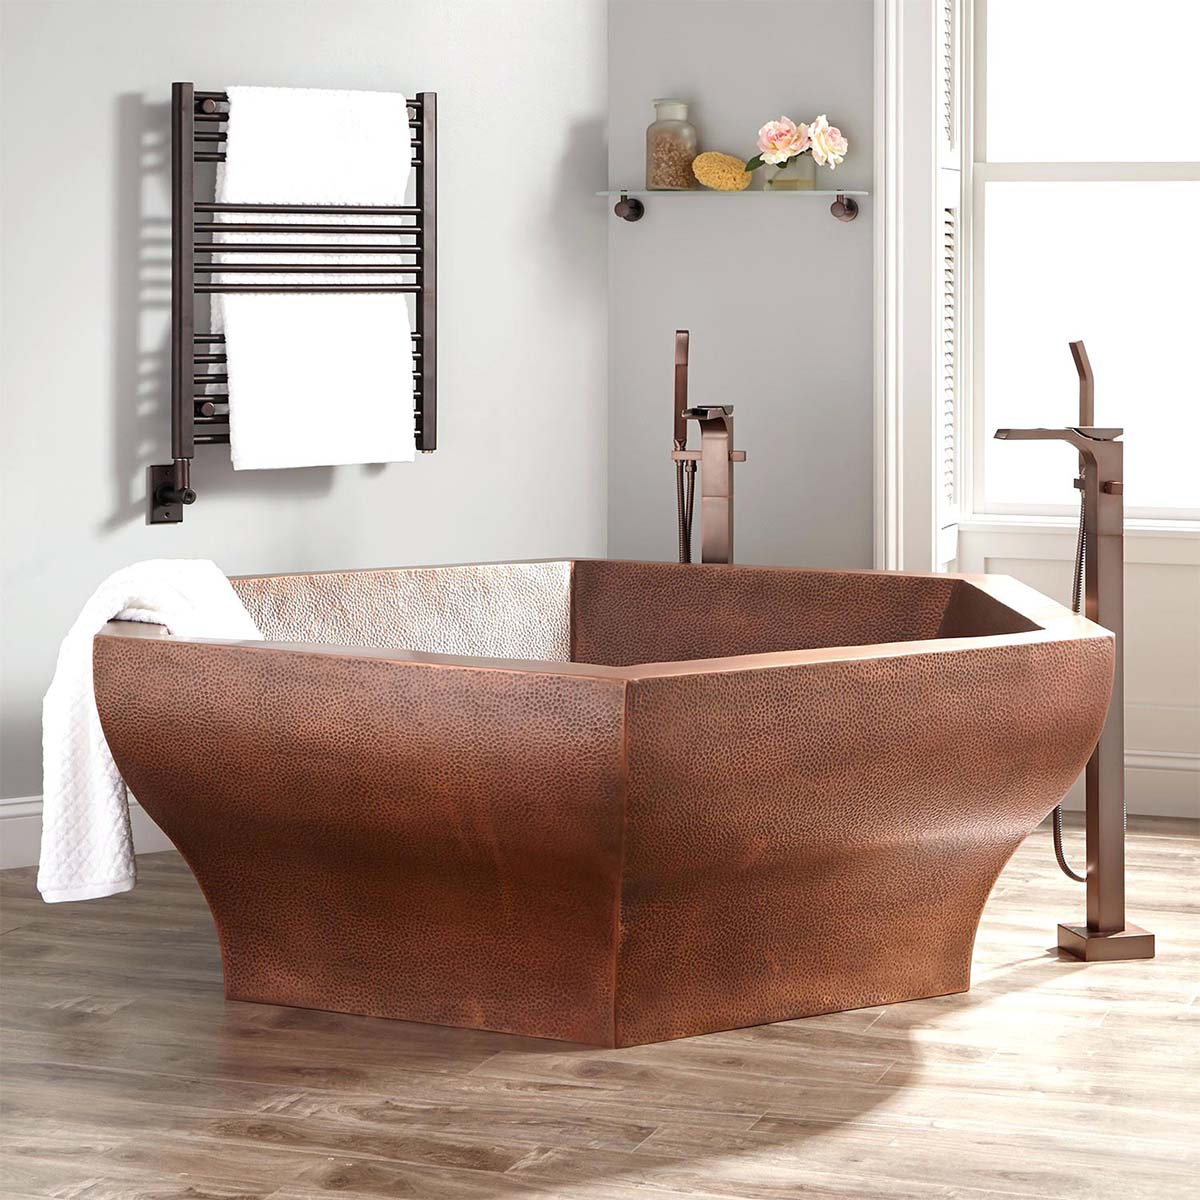 Stand Alone Copper Tubs - Rustica House